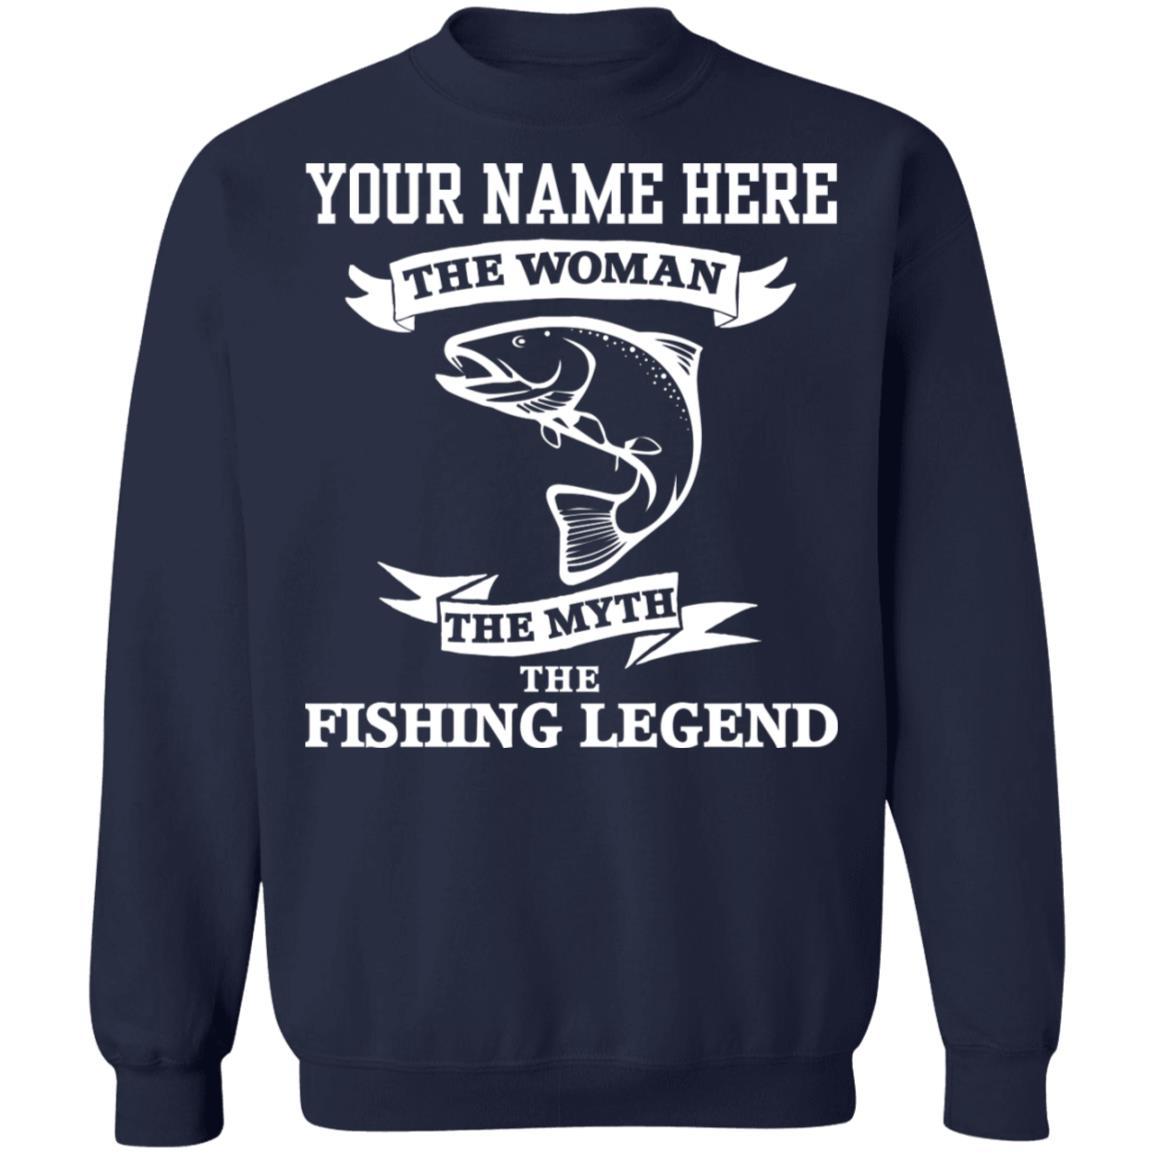 Personalized The Woman the Myth The Fishing Legend Sweatshirt w navy